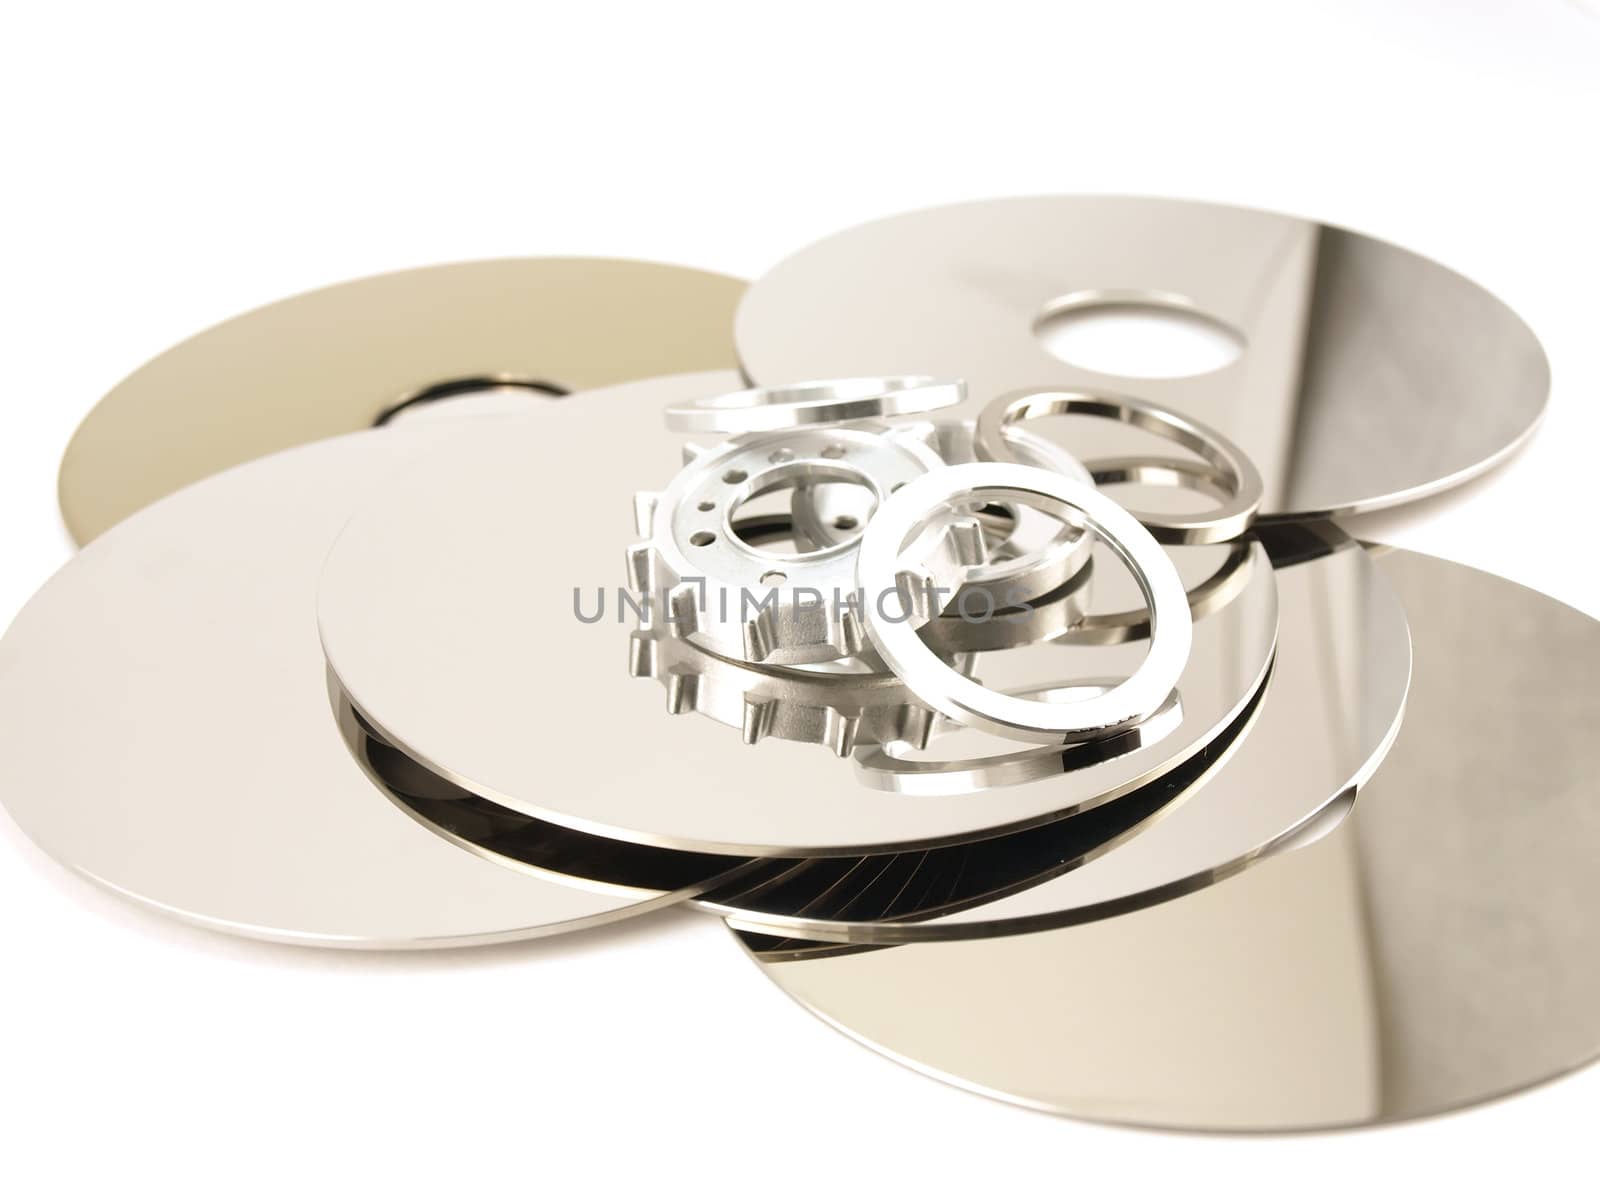 Disks with details of hard drive by sergpet